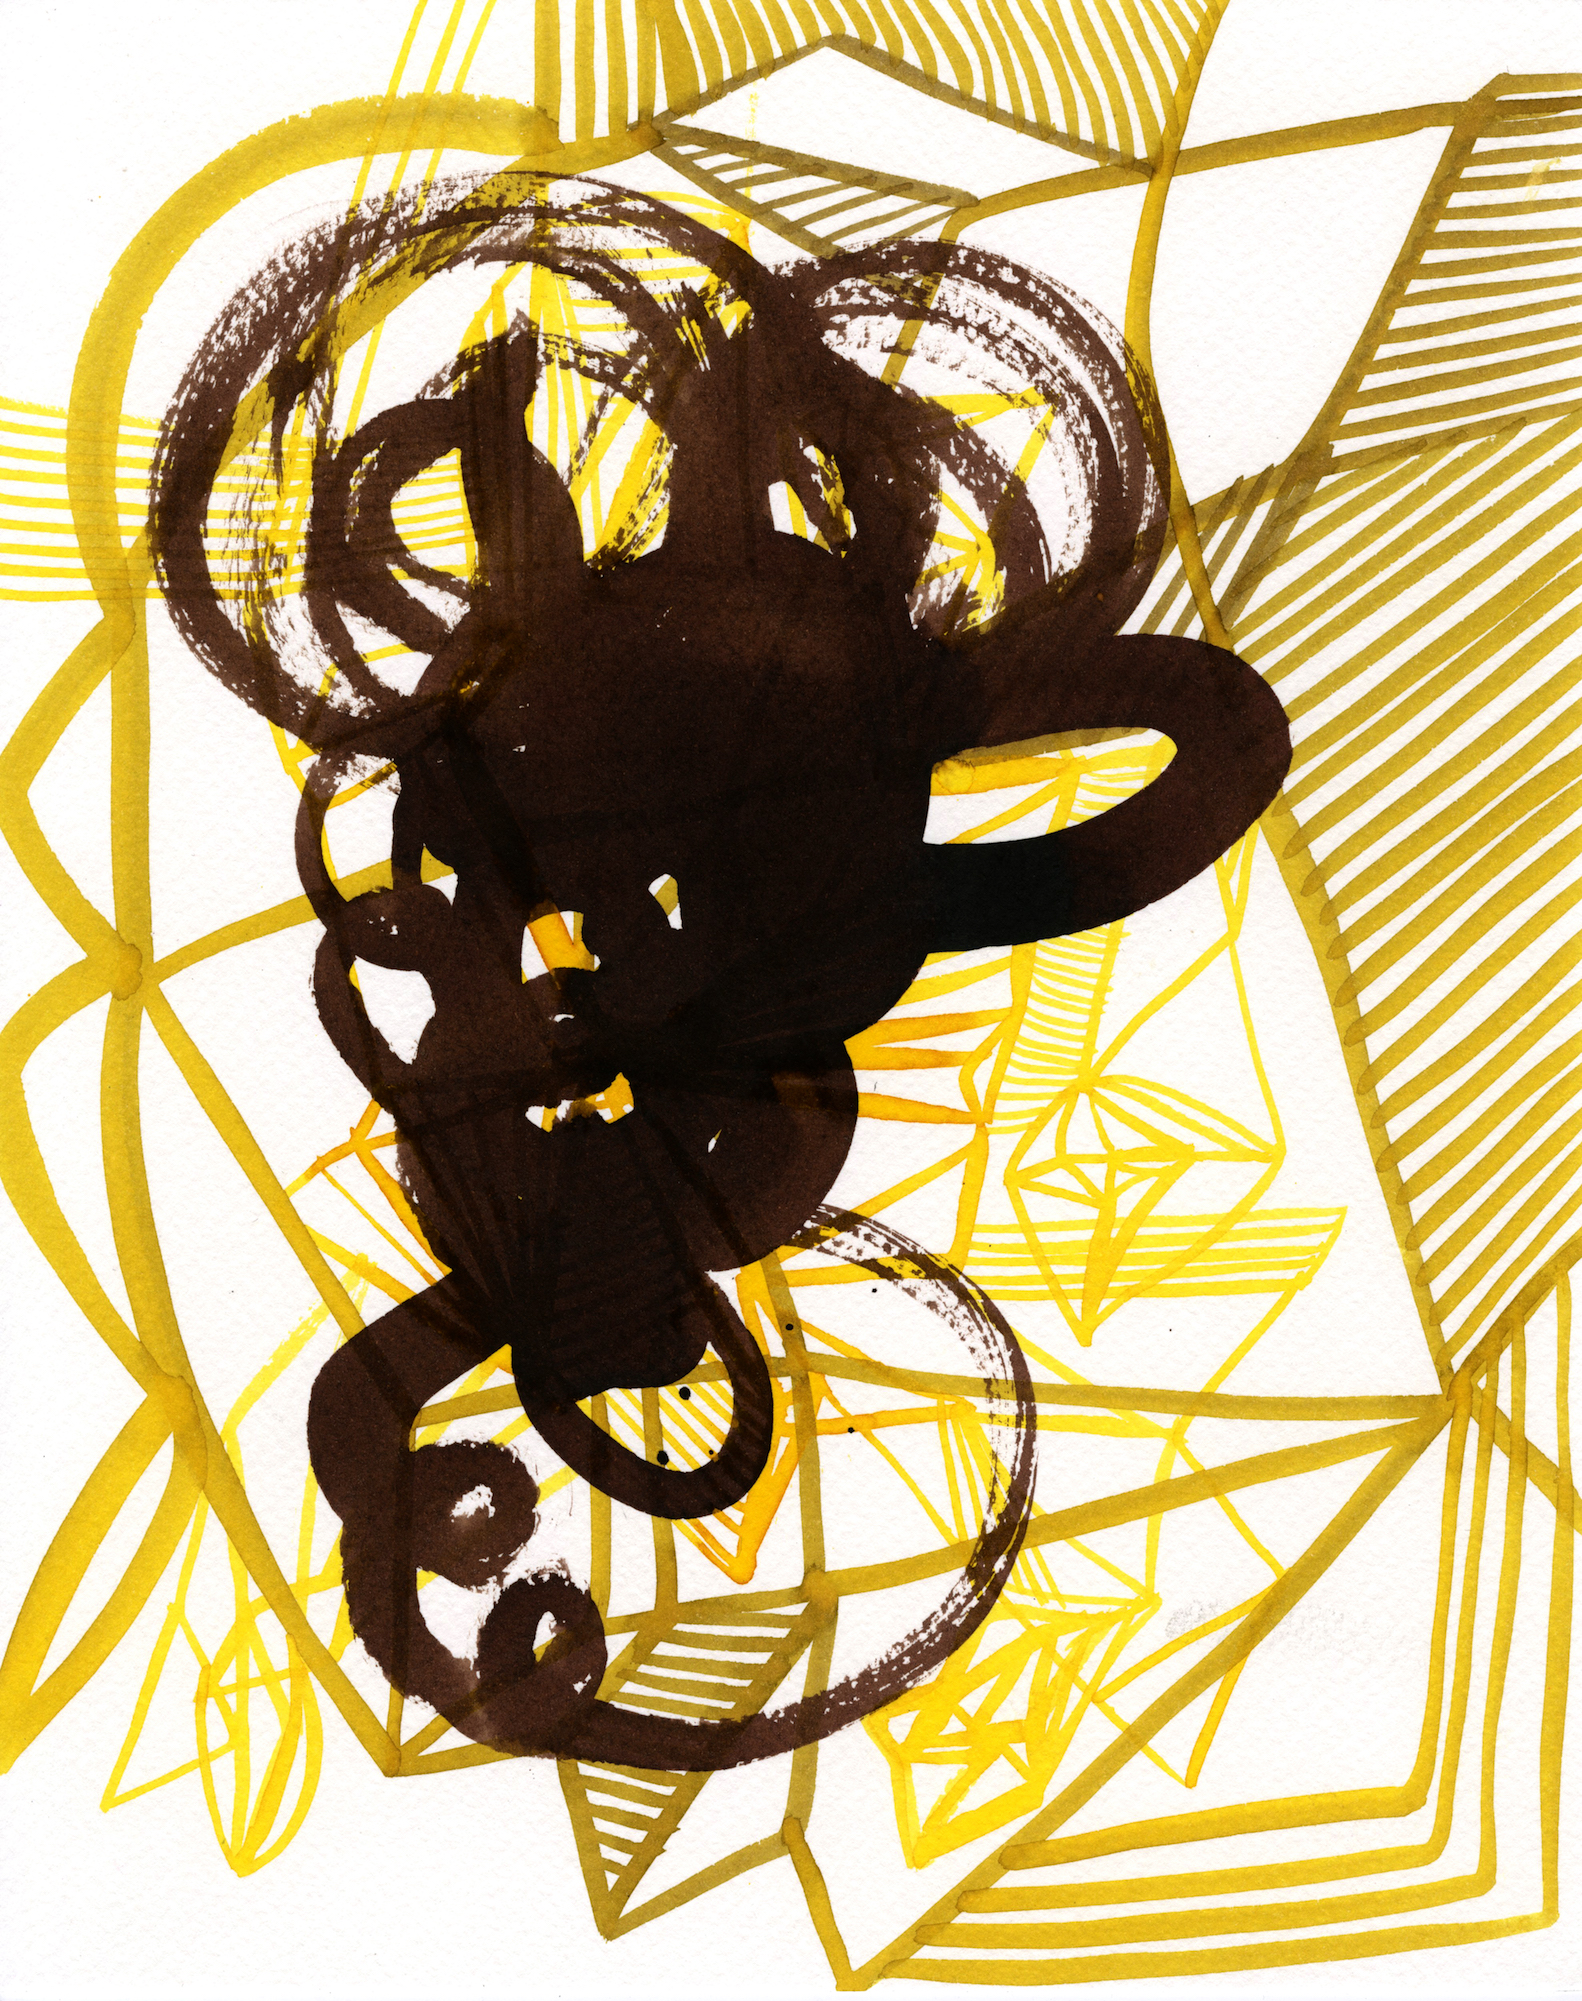  When Mustard meets Soy Sauce, 2014 ink on paper 9x7 inches 